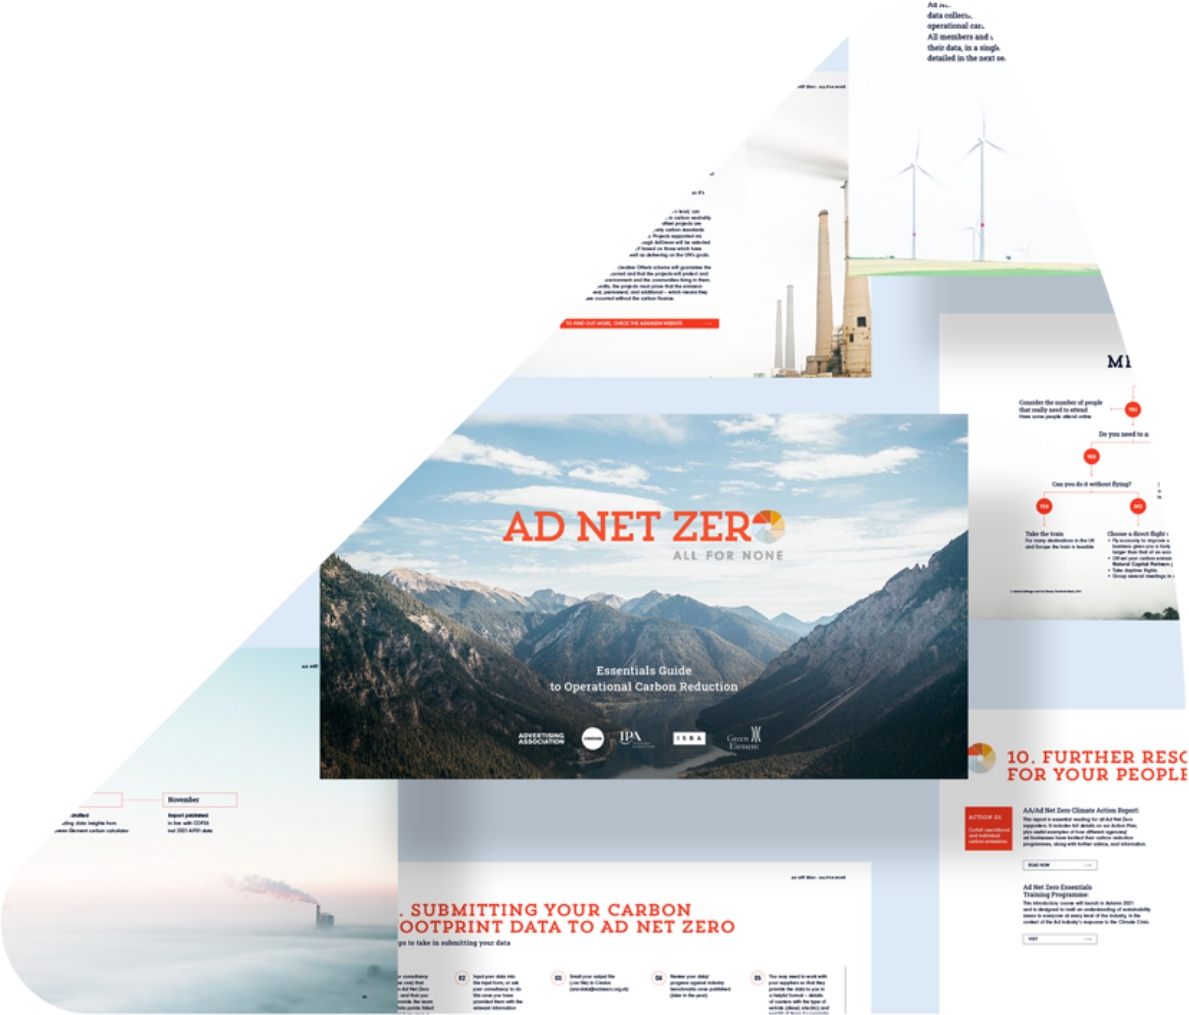 The Ad Net Zero Guide featured image